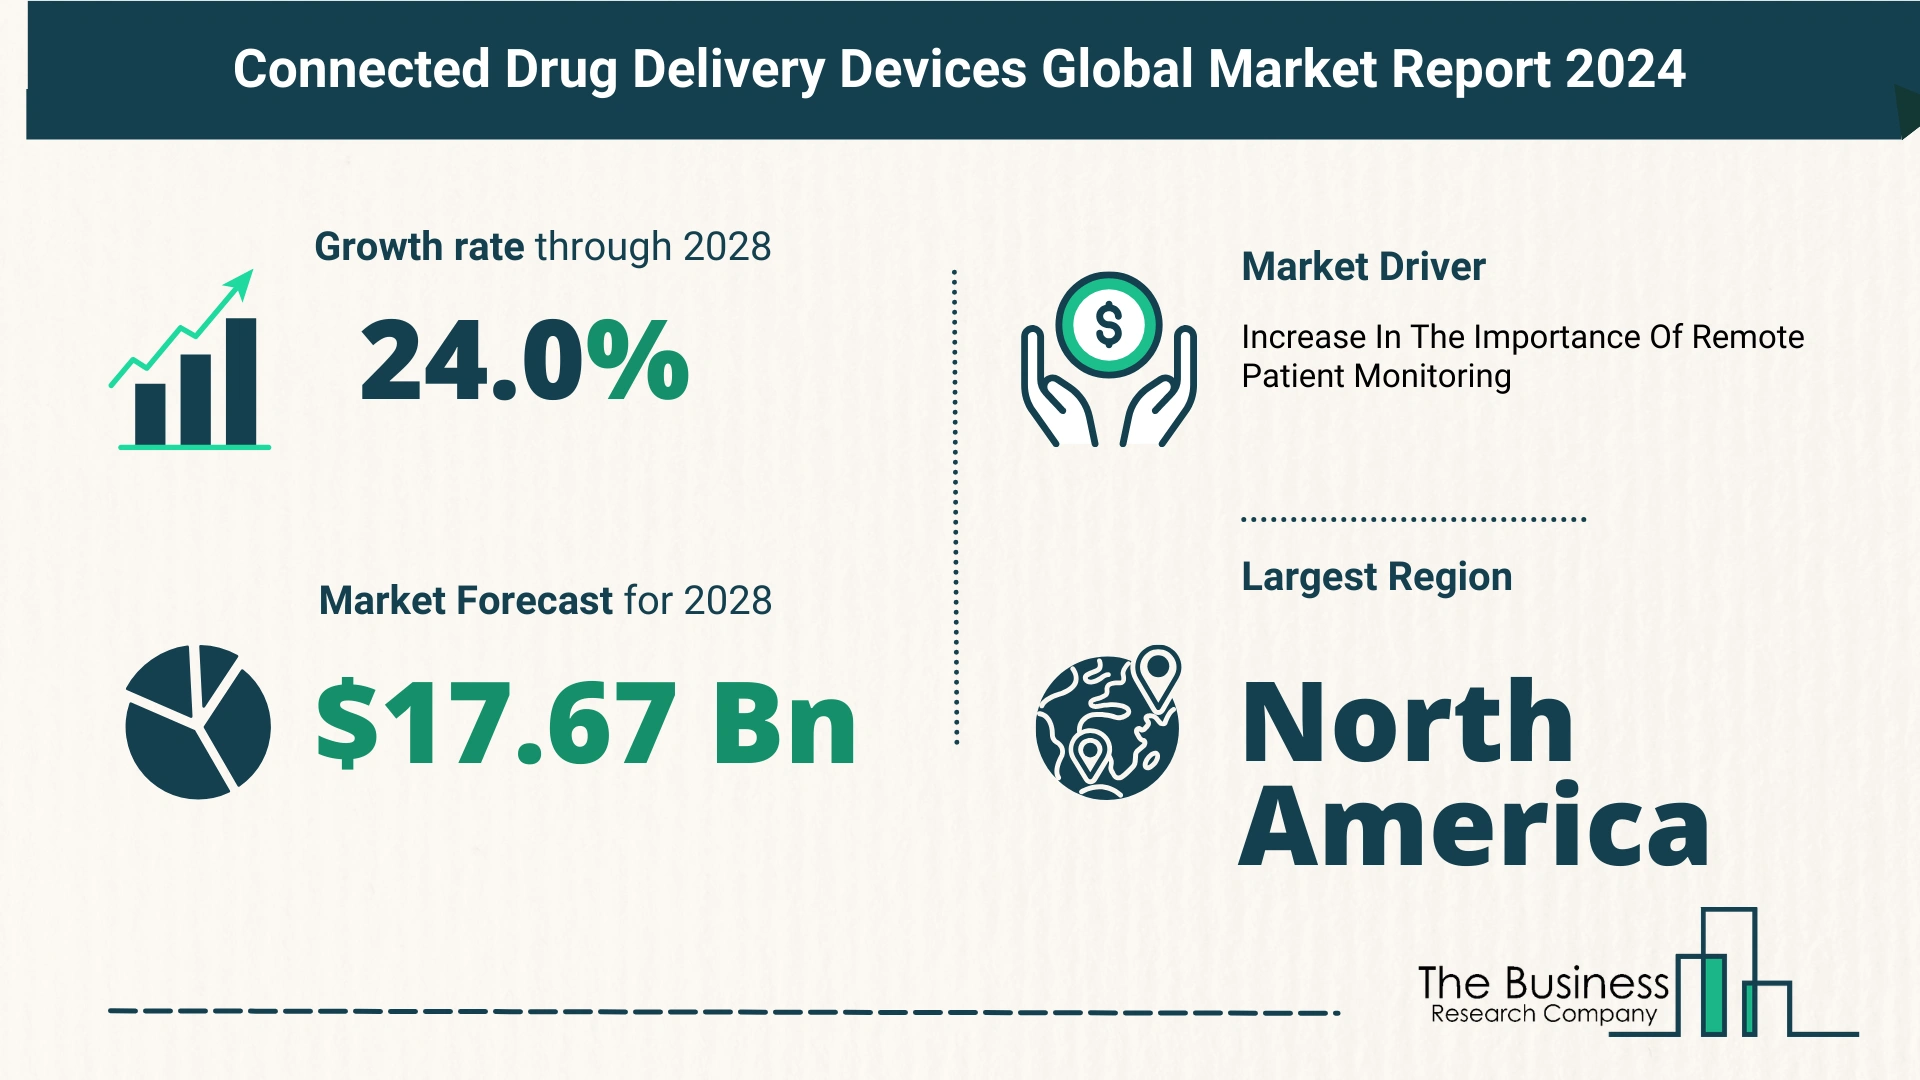 Global Connected Drug Delivery Devices Market Analysis: Estimated Market Size And Growth Rate